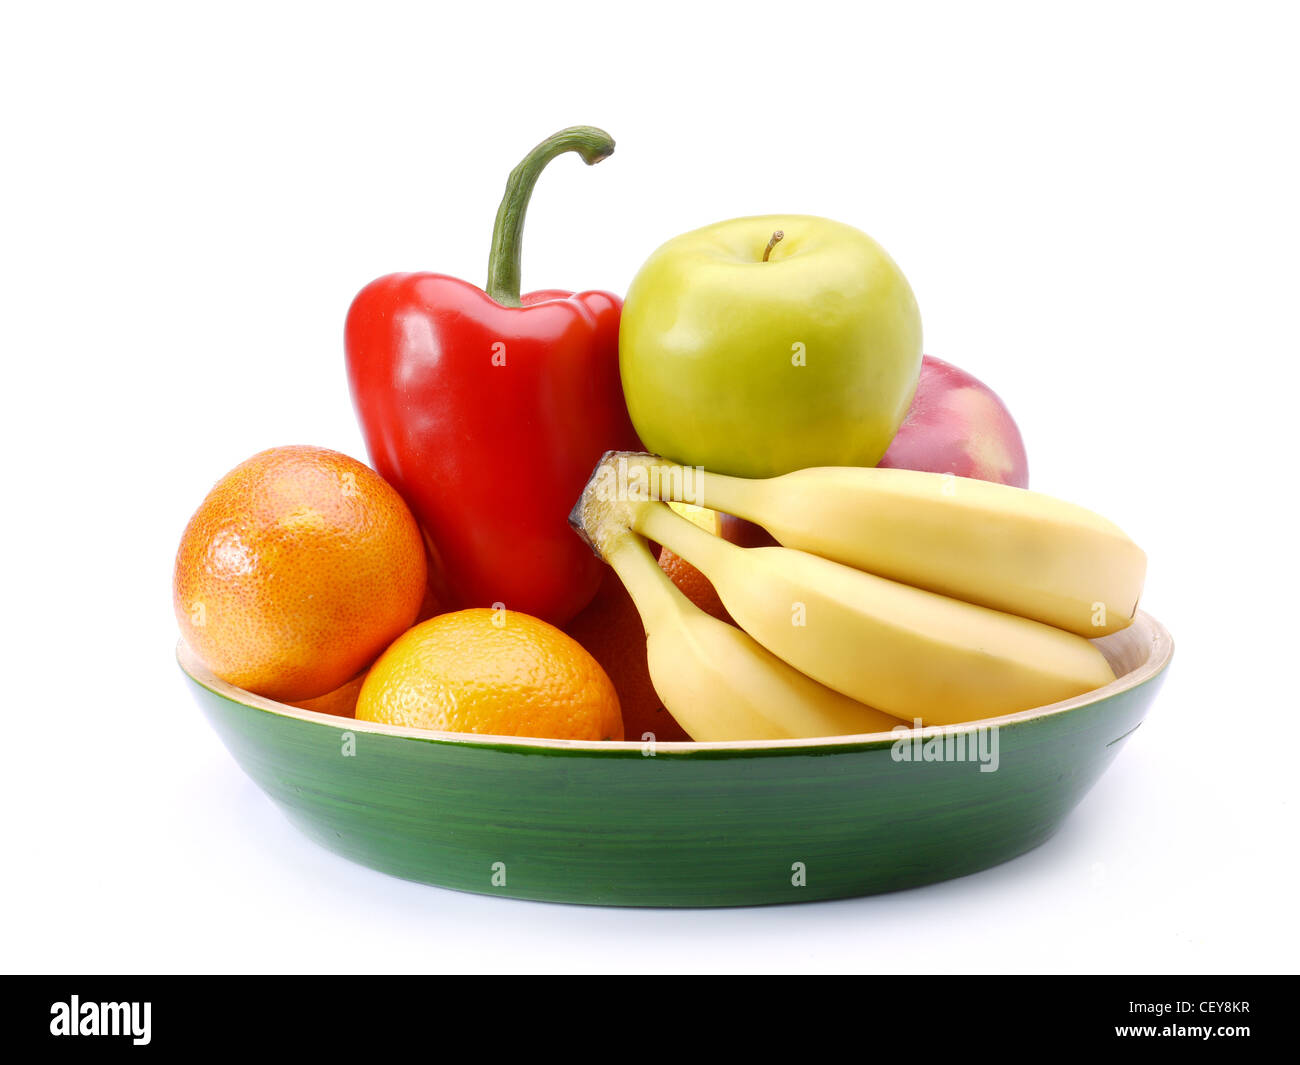 Plate of fresh fruits and vegetables shot on white Stock Photo